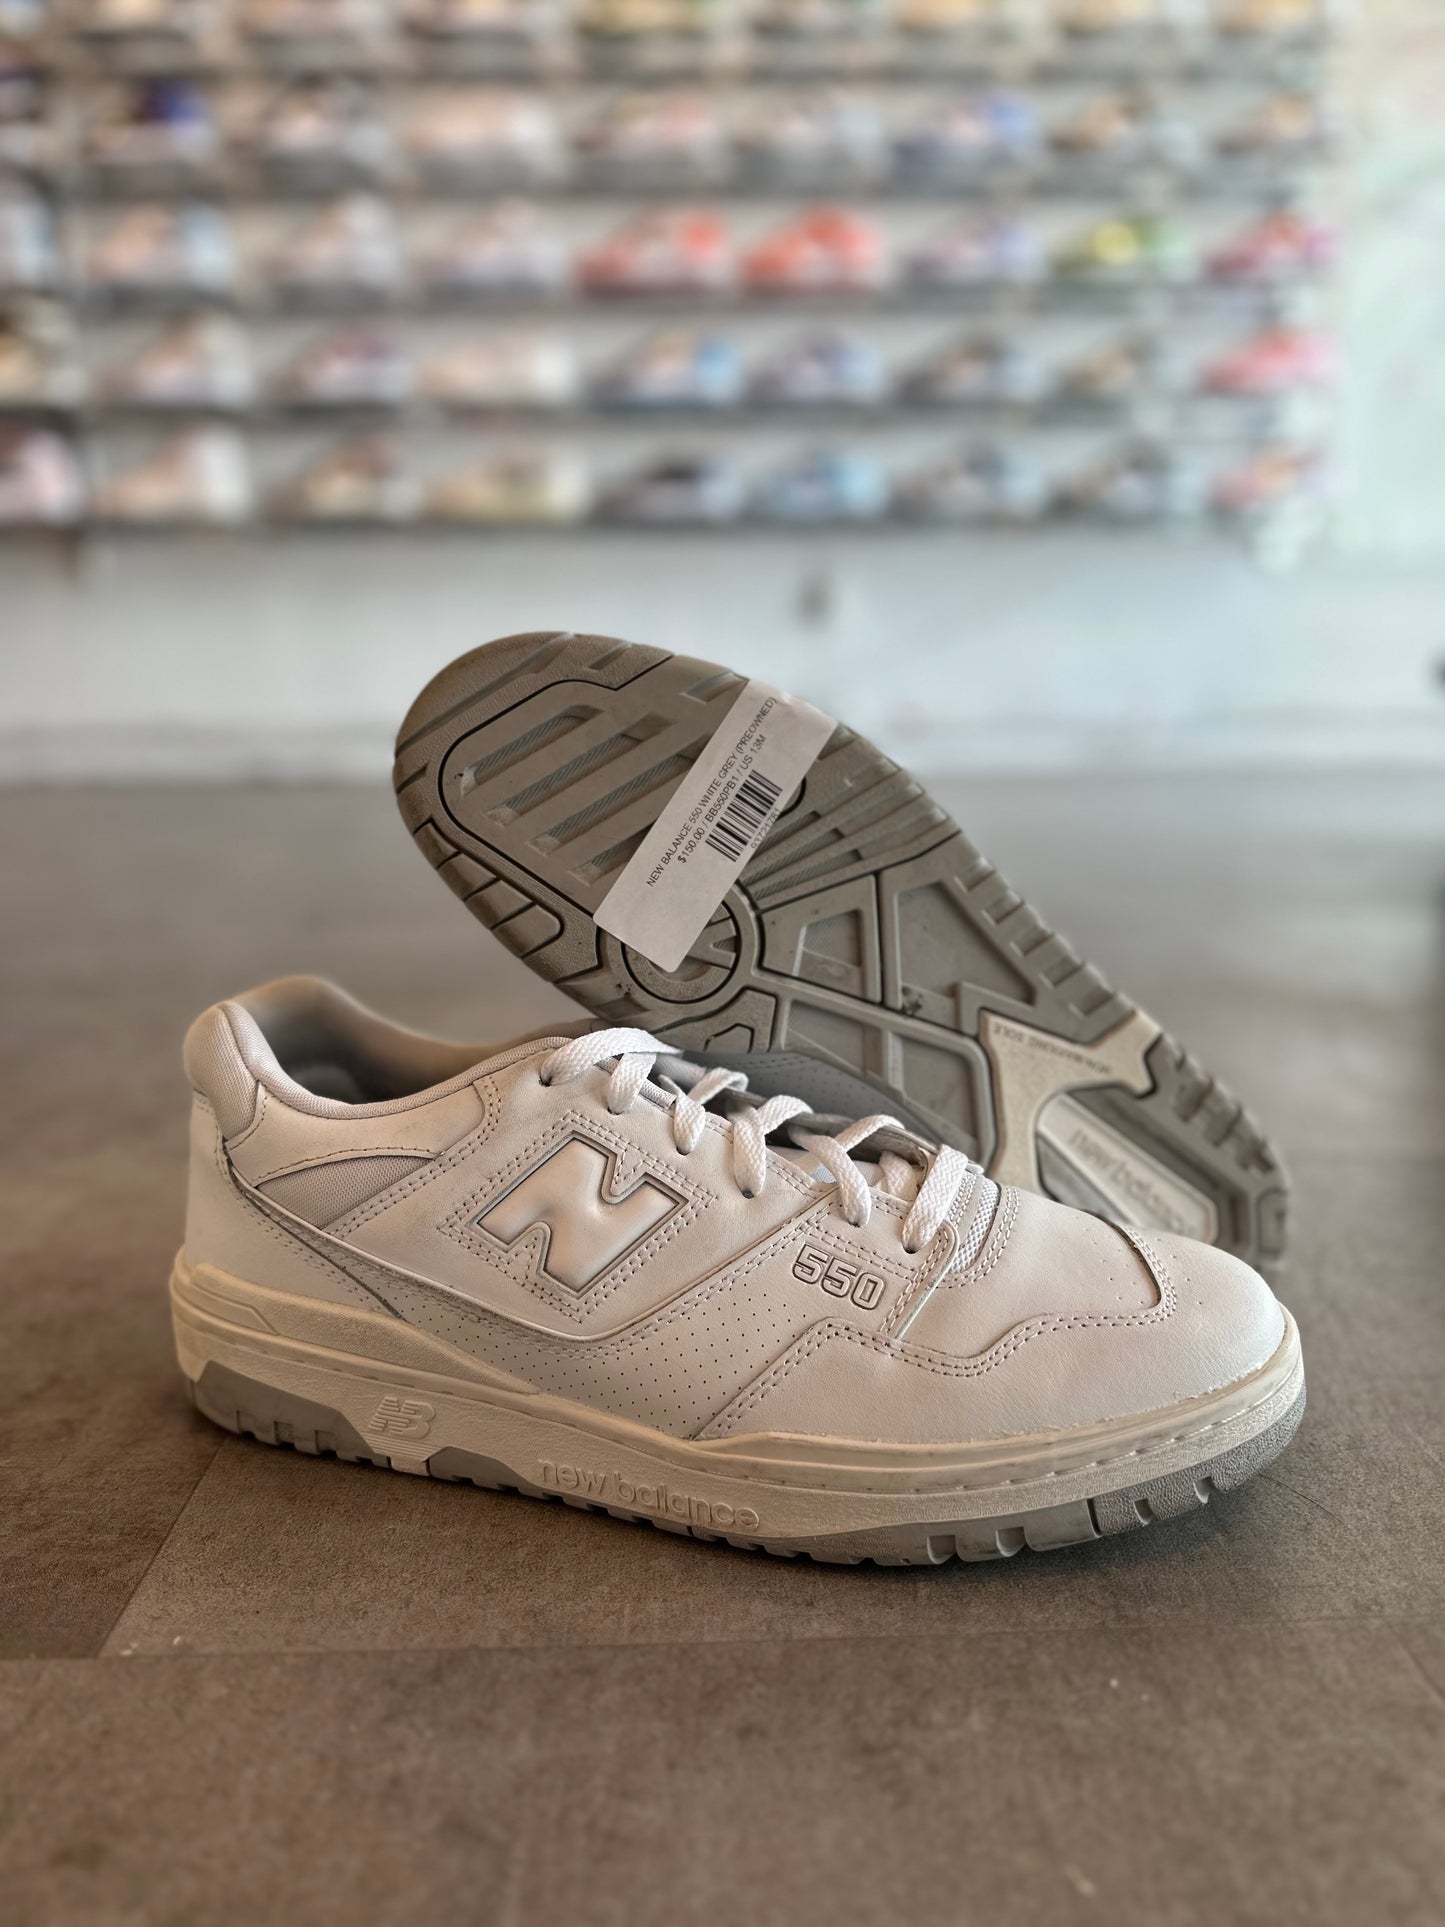 New Balance 550 White Grey (Preowned)